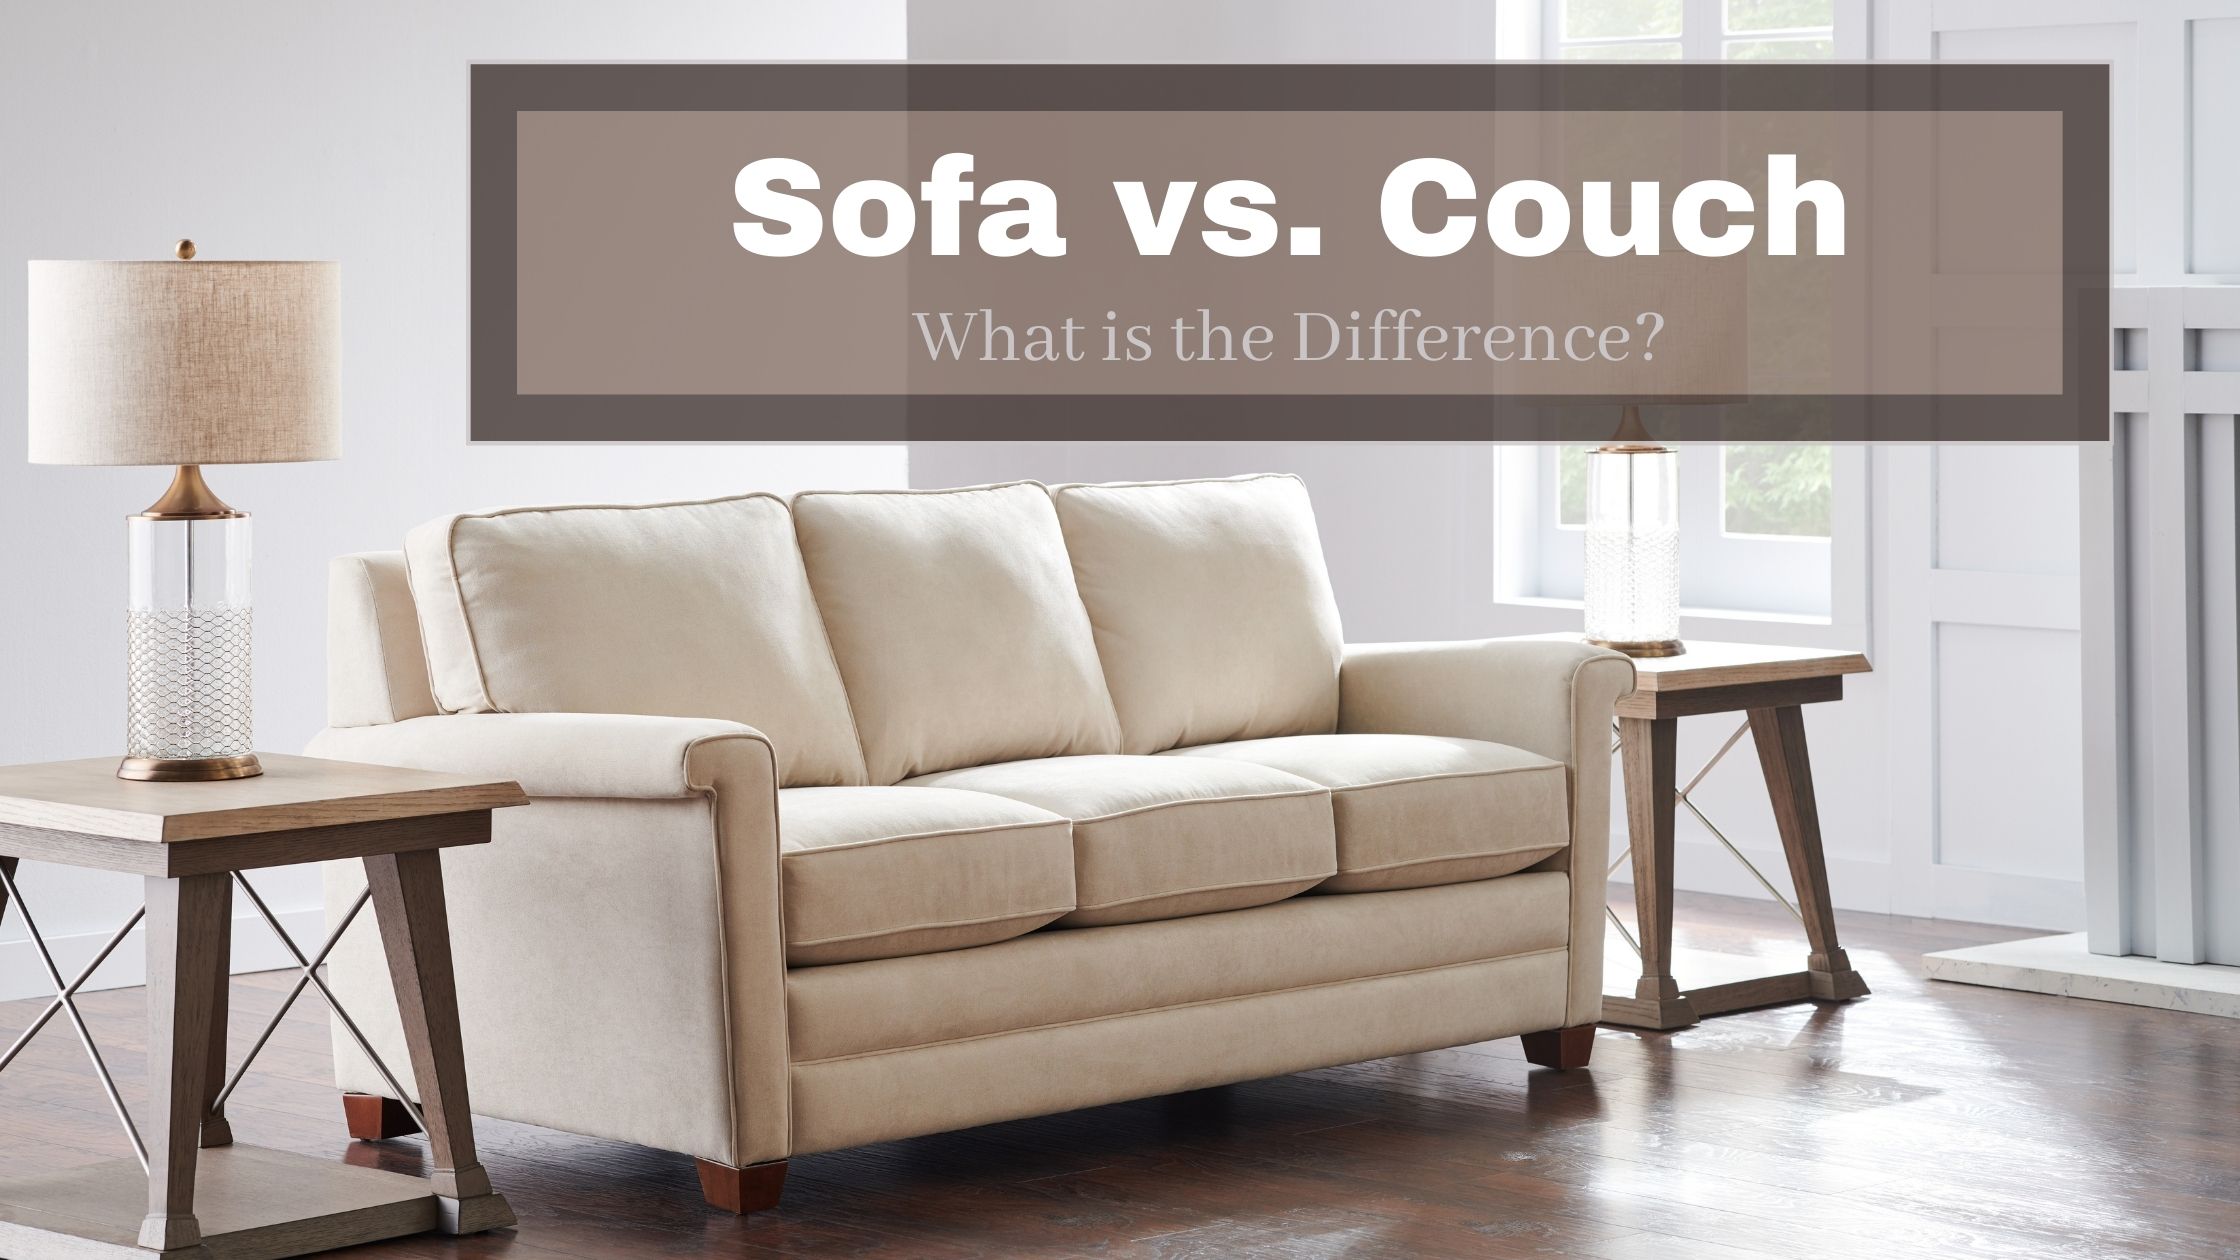 Sofa Vs. Couch 1 #keepProtocol